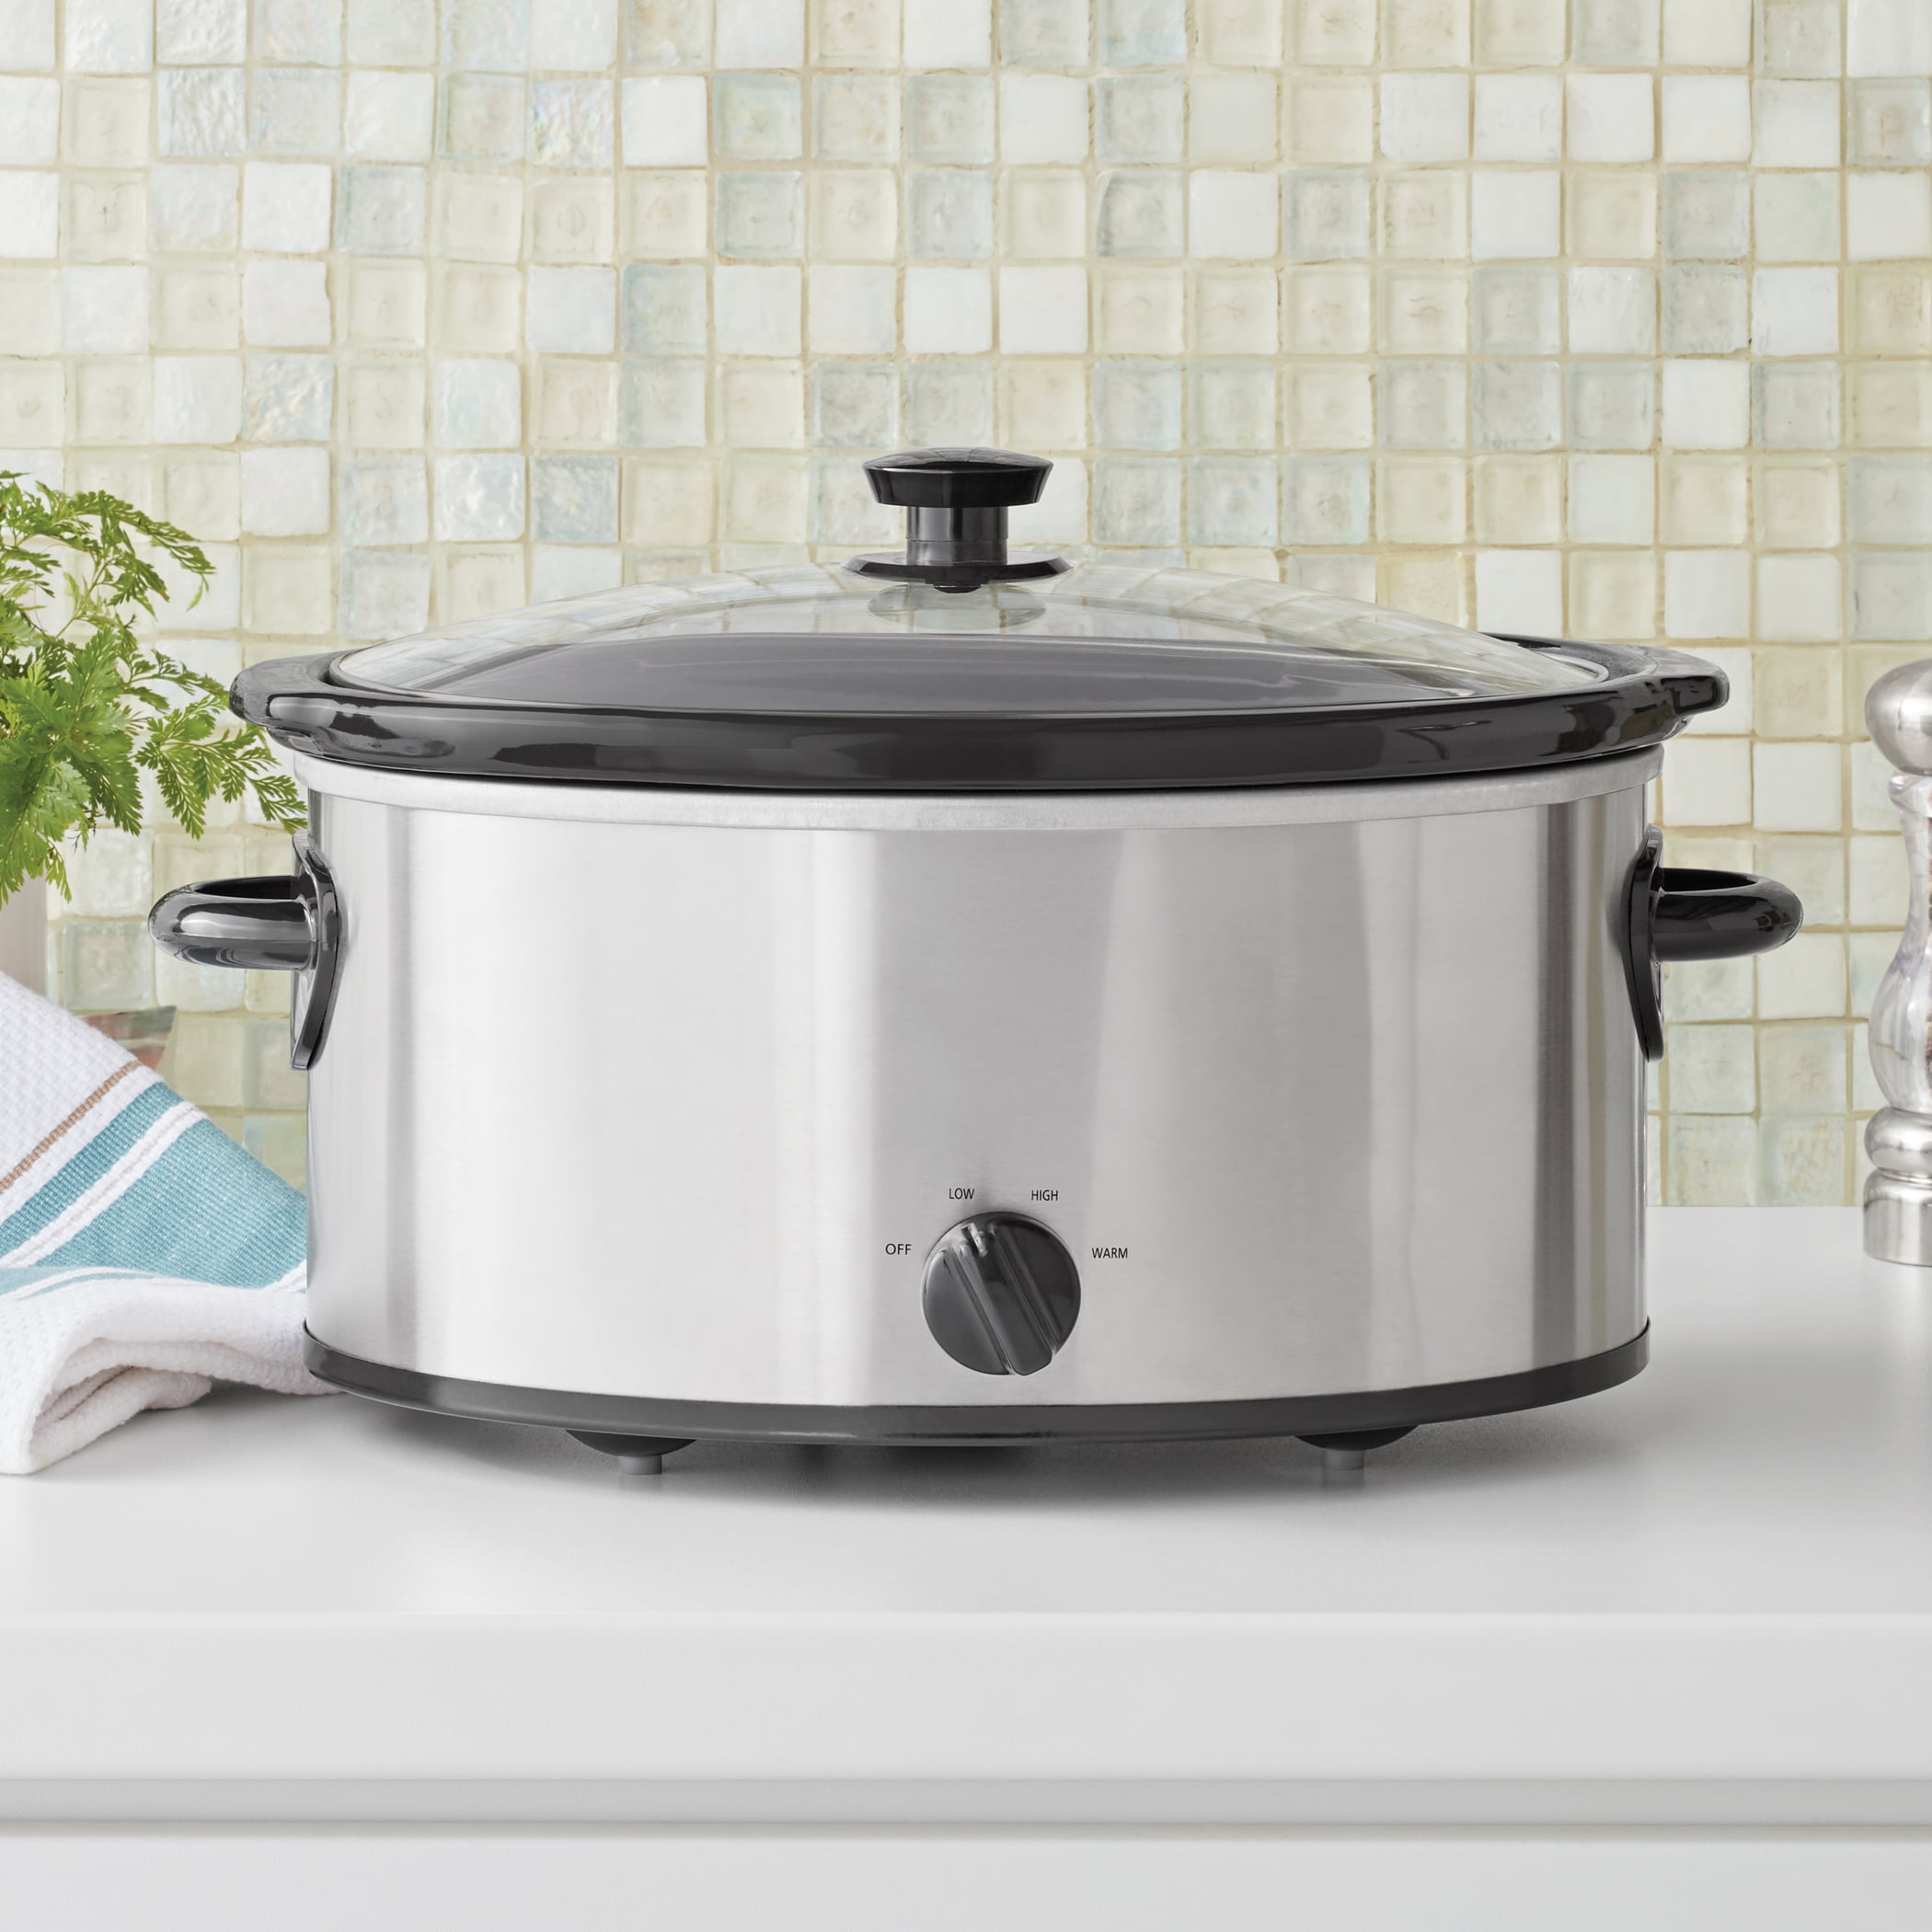 Mainstays 6QT Slow Cooker, Stainless Steel